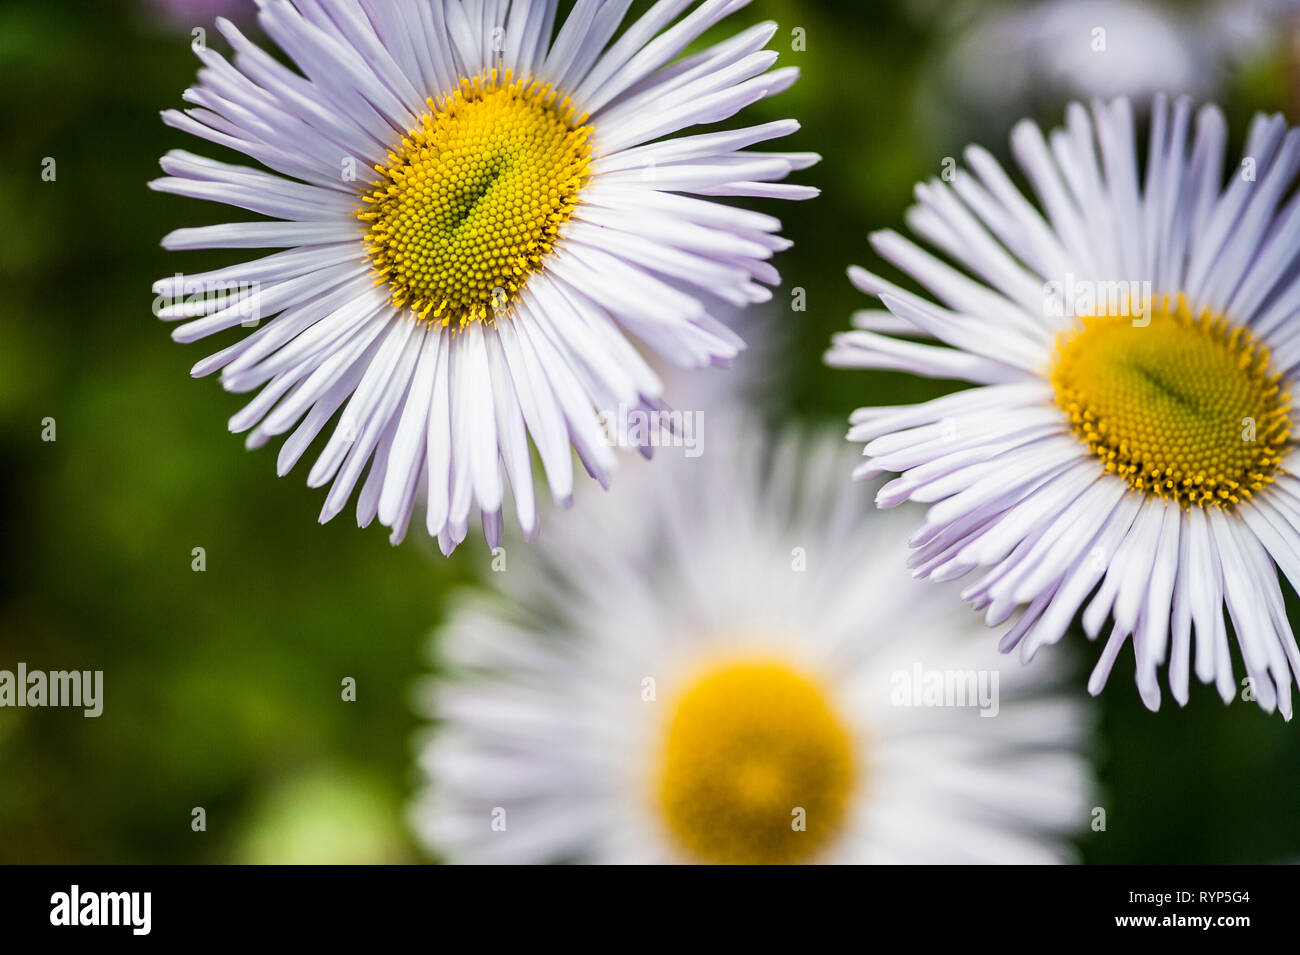 Daisy, Erigeron speciosus, group of fully opened, white flower heads with pinkish hue, short depth of field Stock Photo